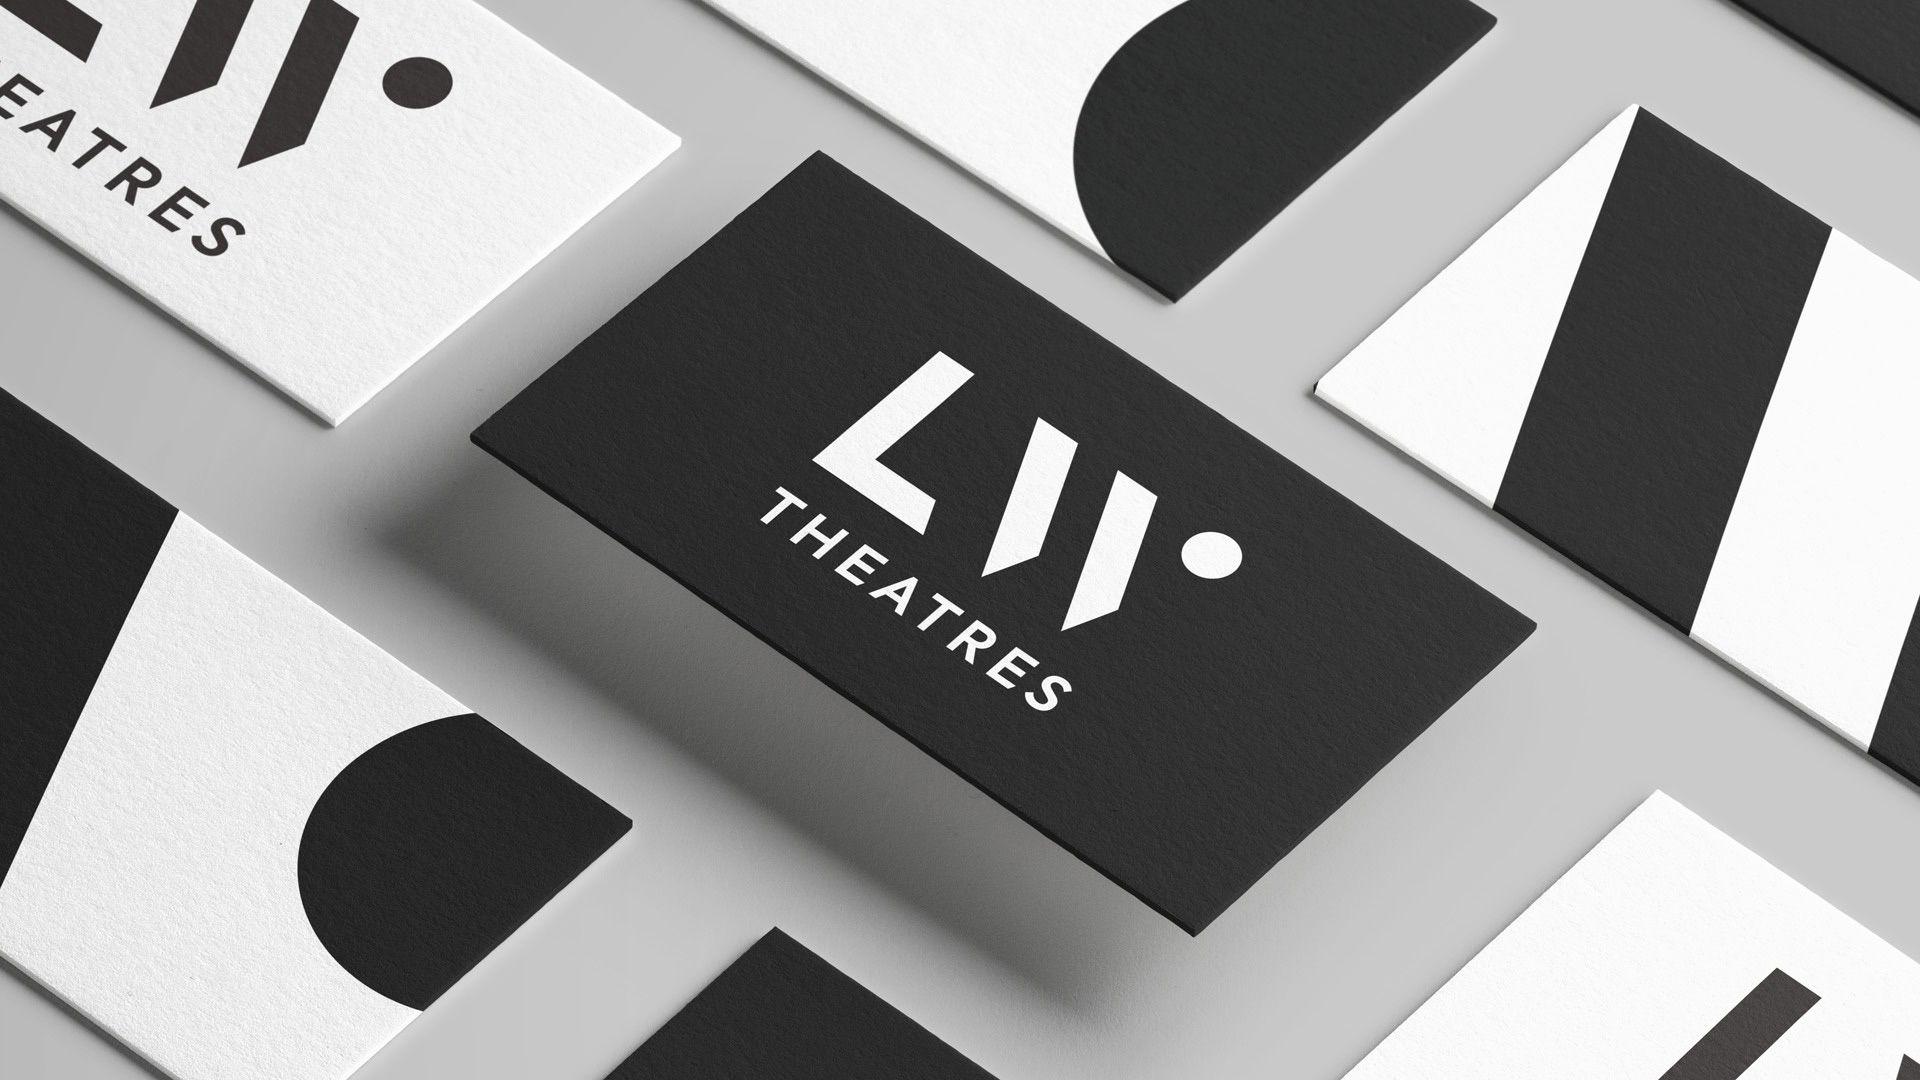 LW Logo - Brand New: New Logo and Identity for LW Theatres by Elmwood